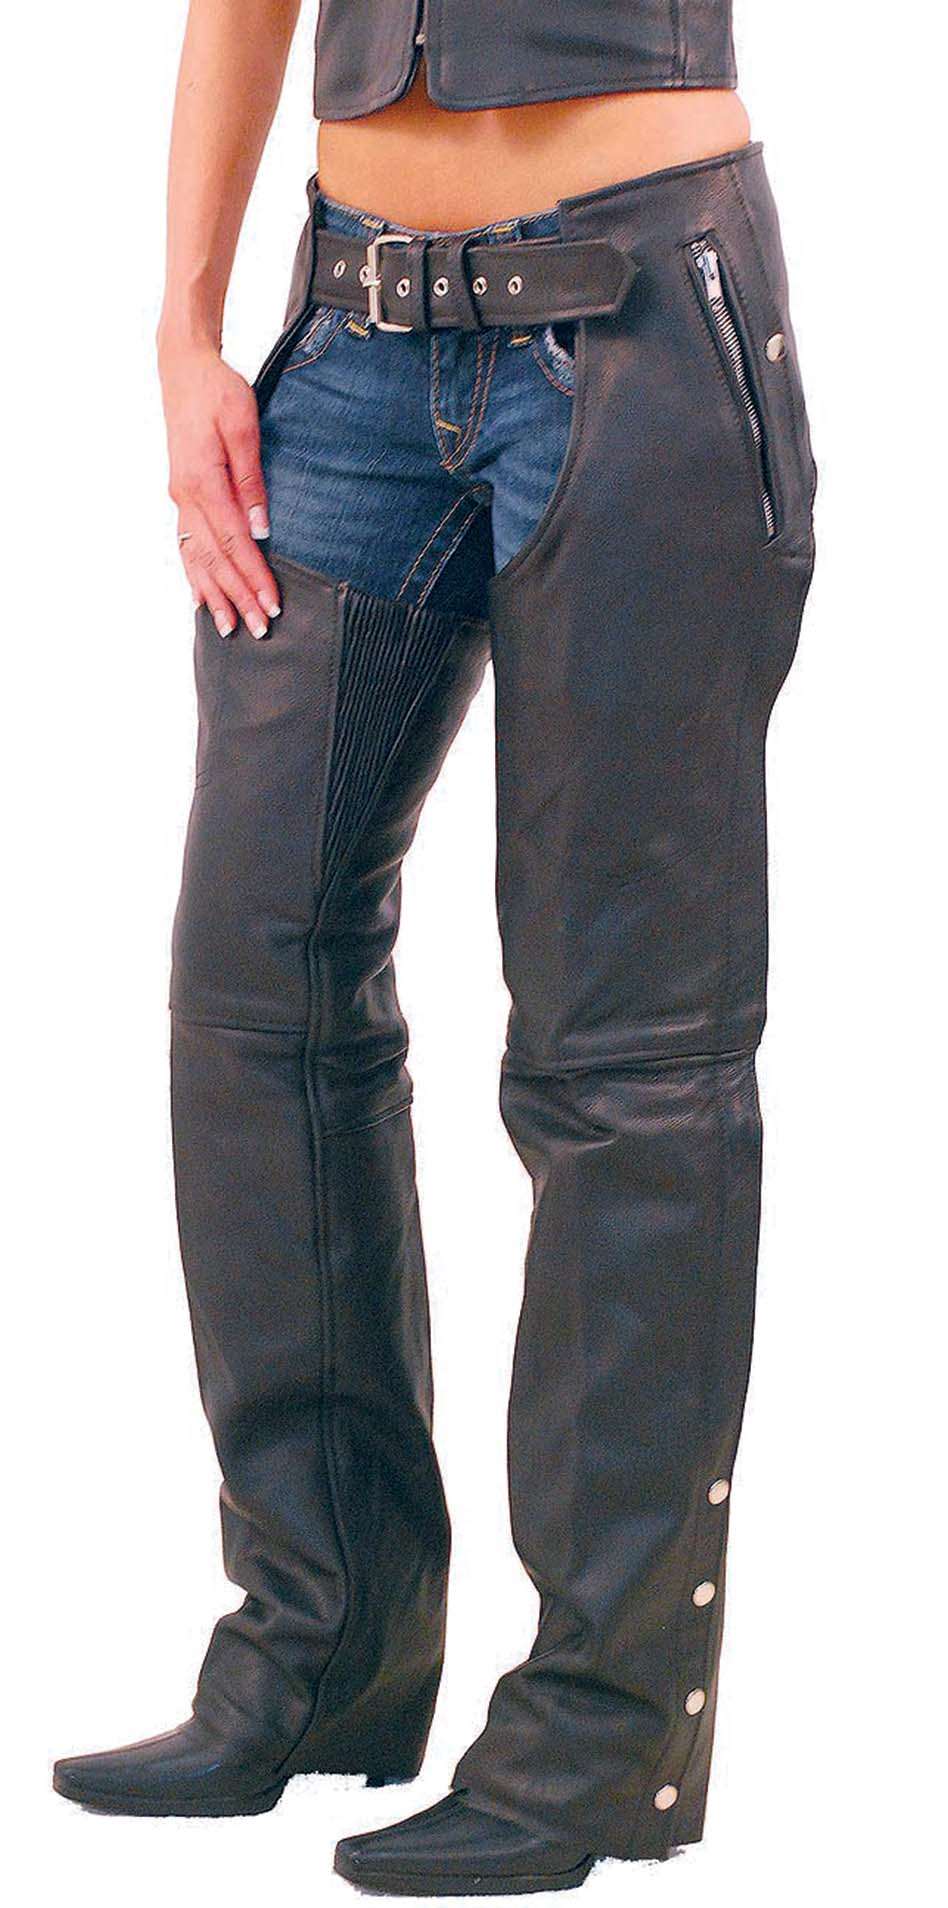 Ultimate Leather Chaps Pockets - Maker of Jacket